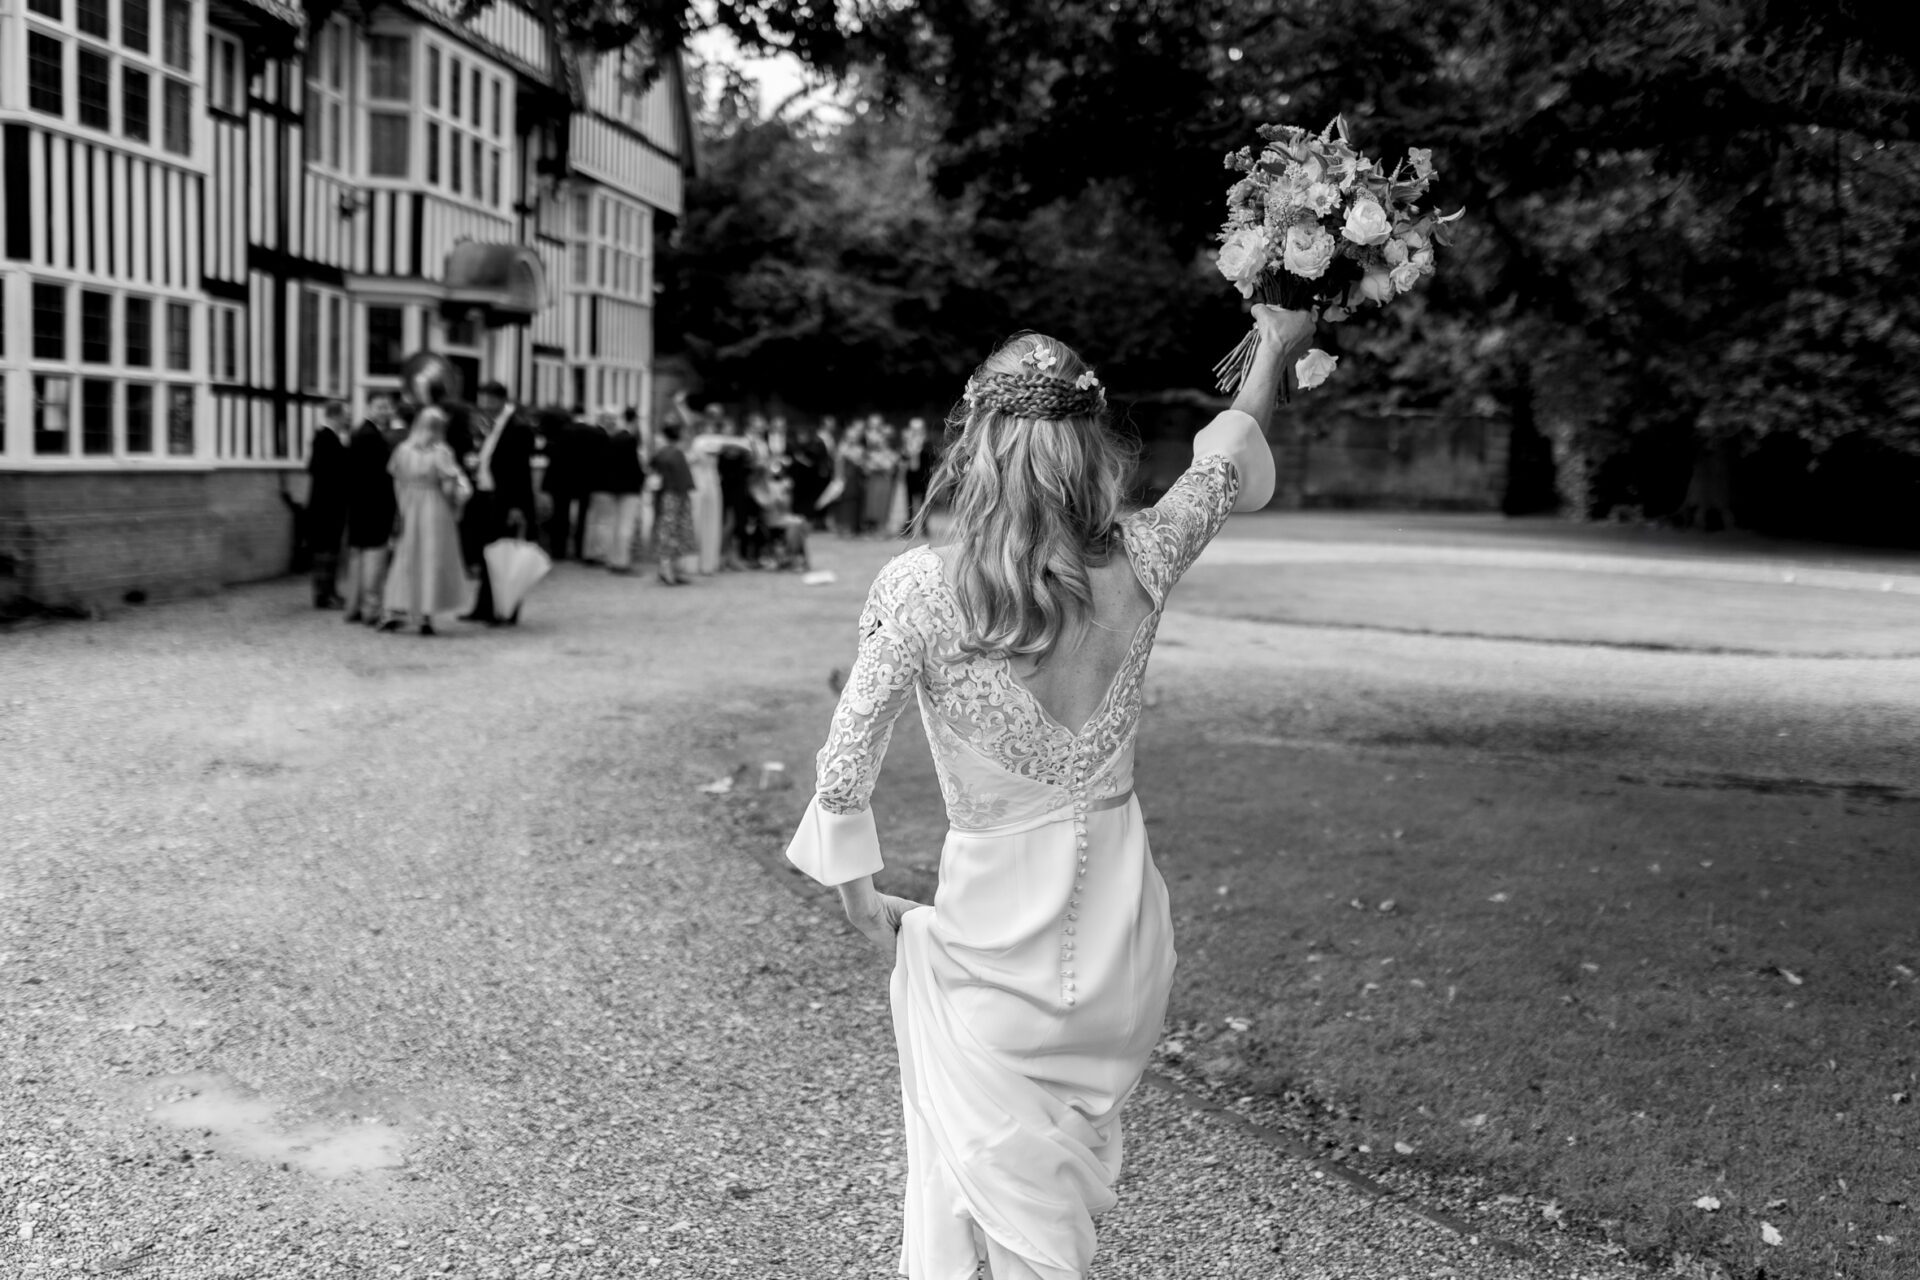 The bride greets her wedding guests at her Kent wedding